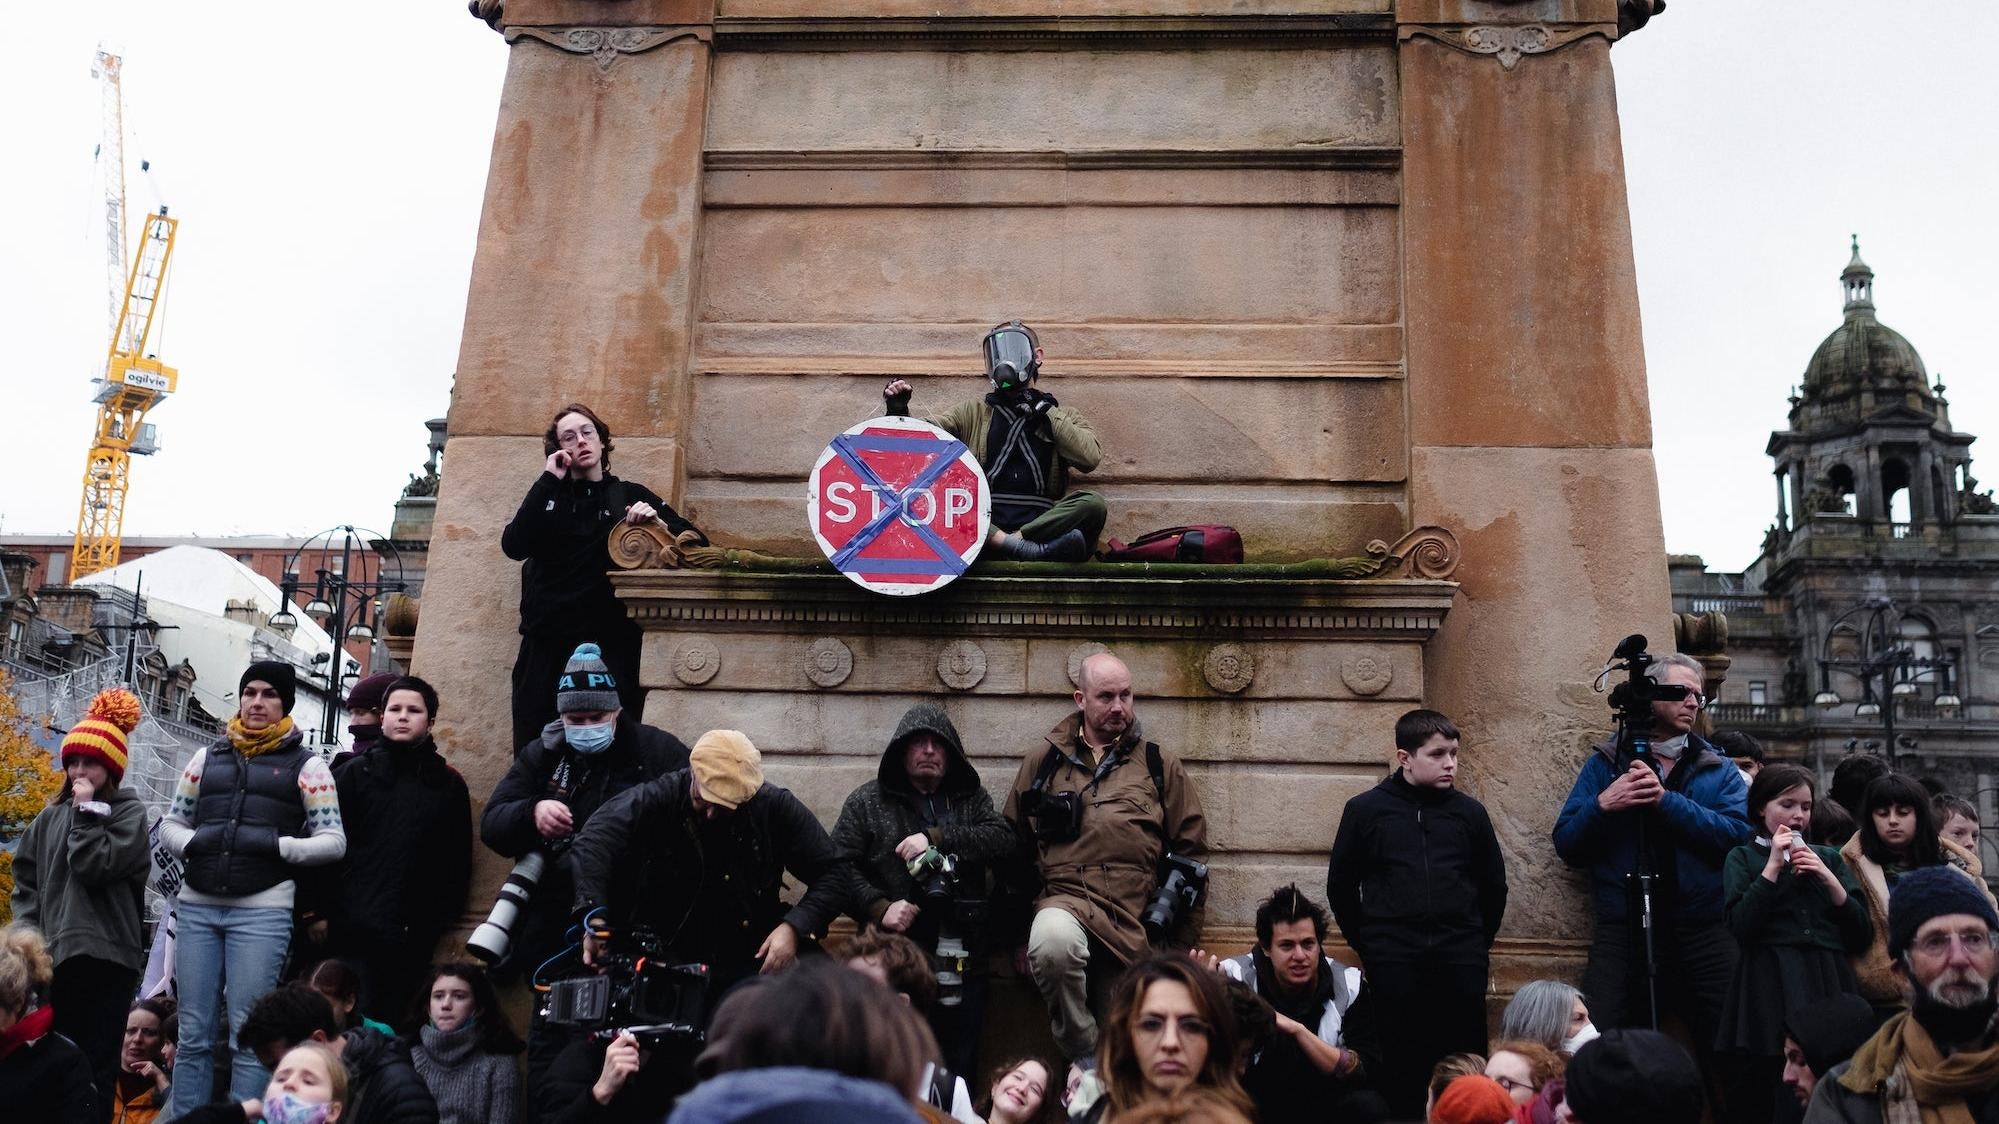 A protester displays the Extinction Rebellion symbol on a stop sign in George Square. (Photo: Brian Kahn)